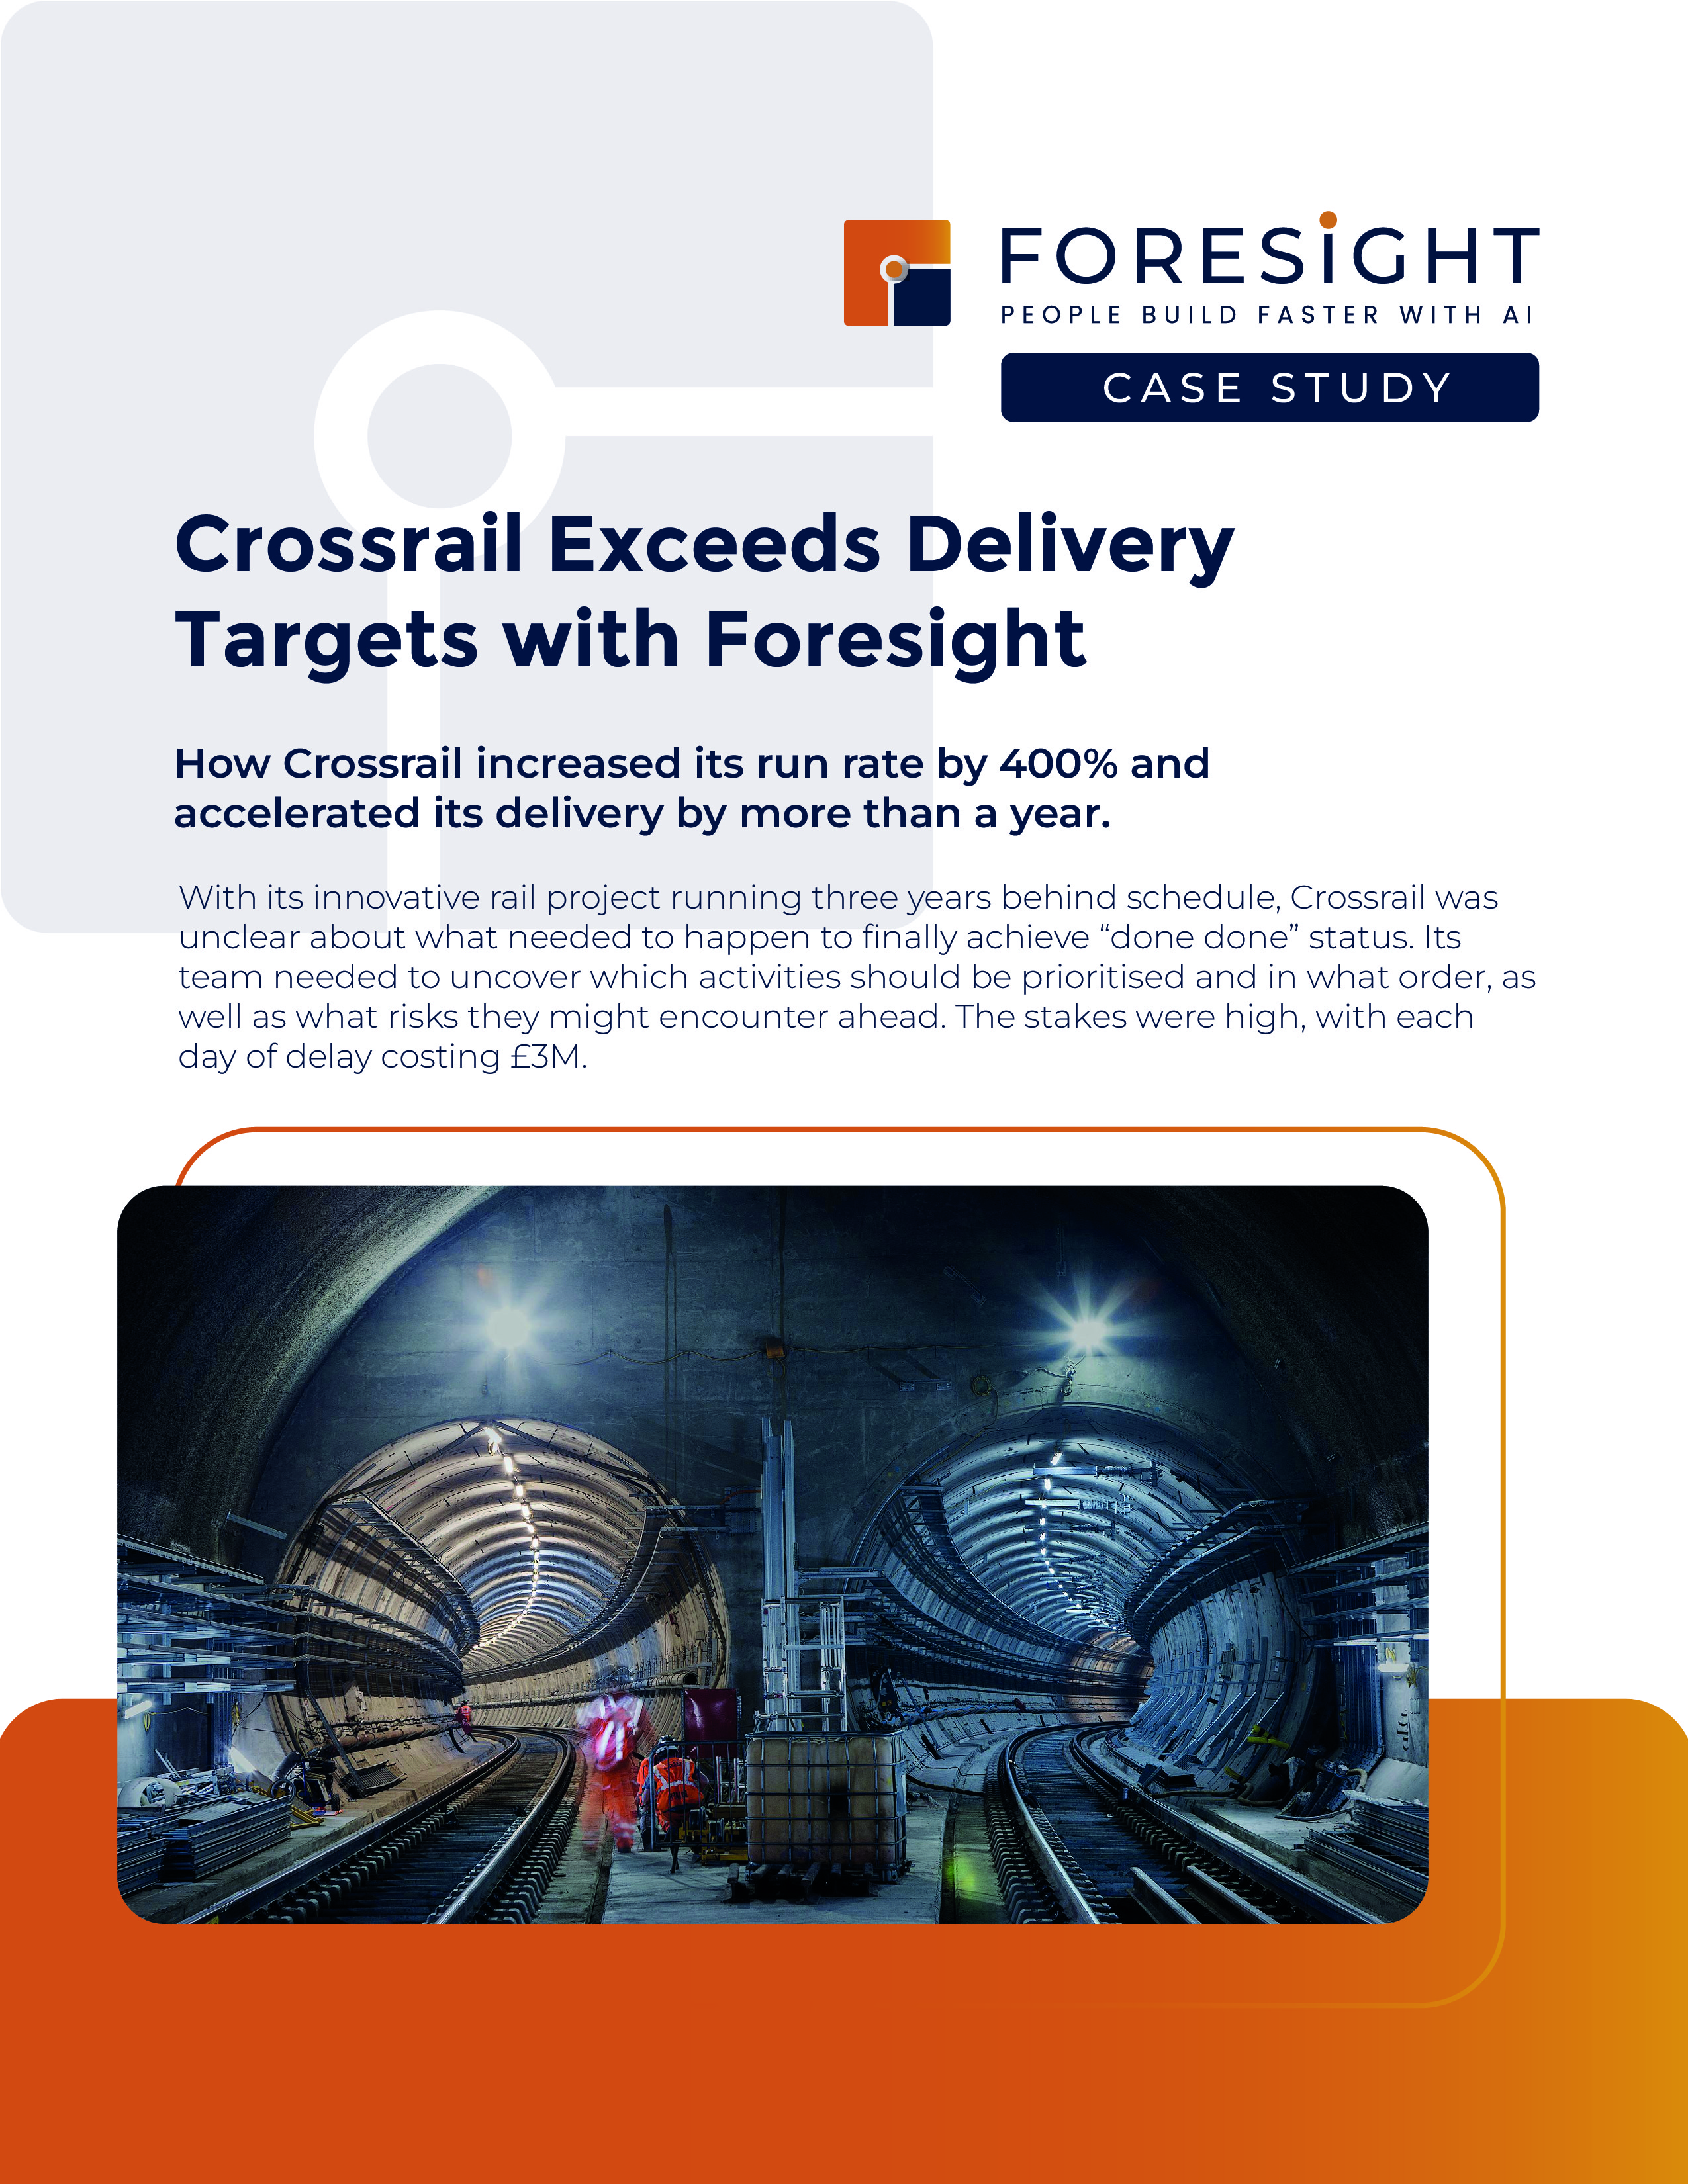 Crossrail Exceeds Delivery Targets With Foresight